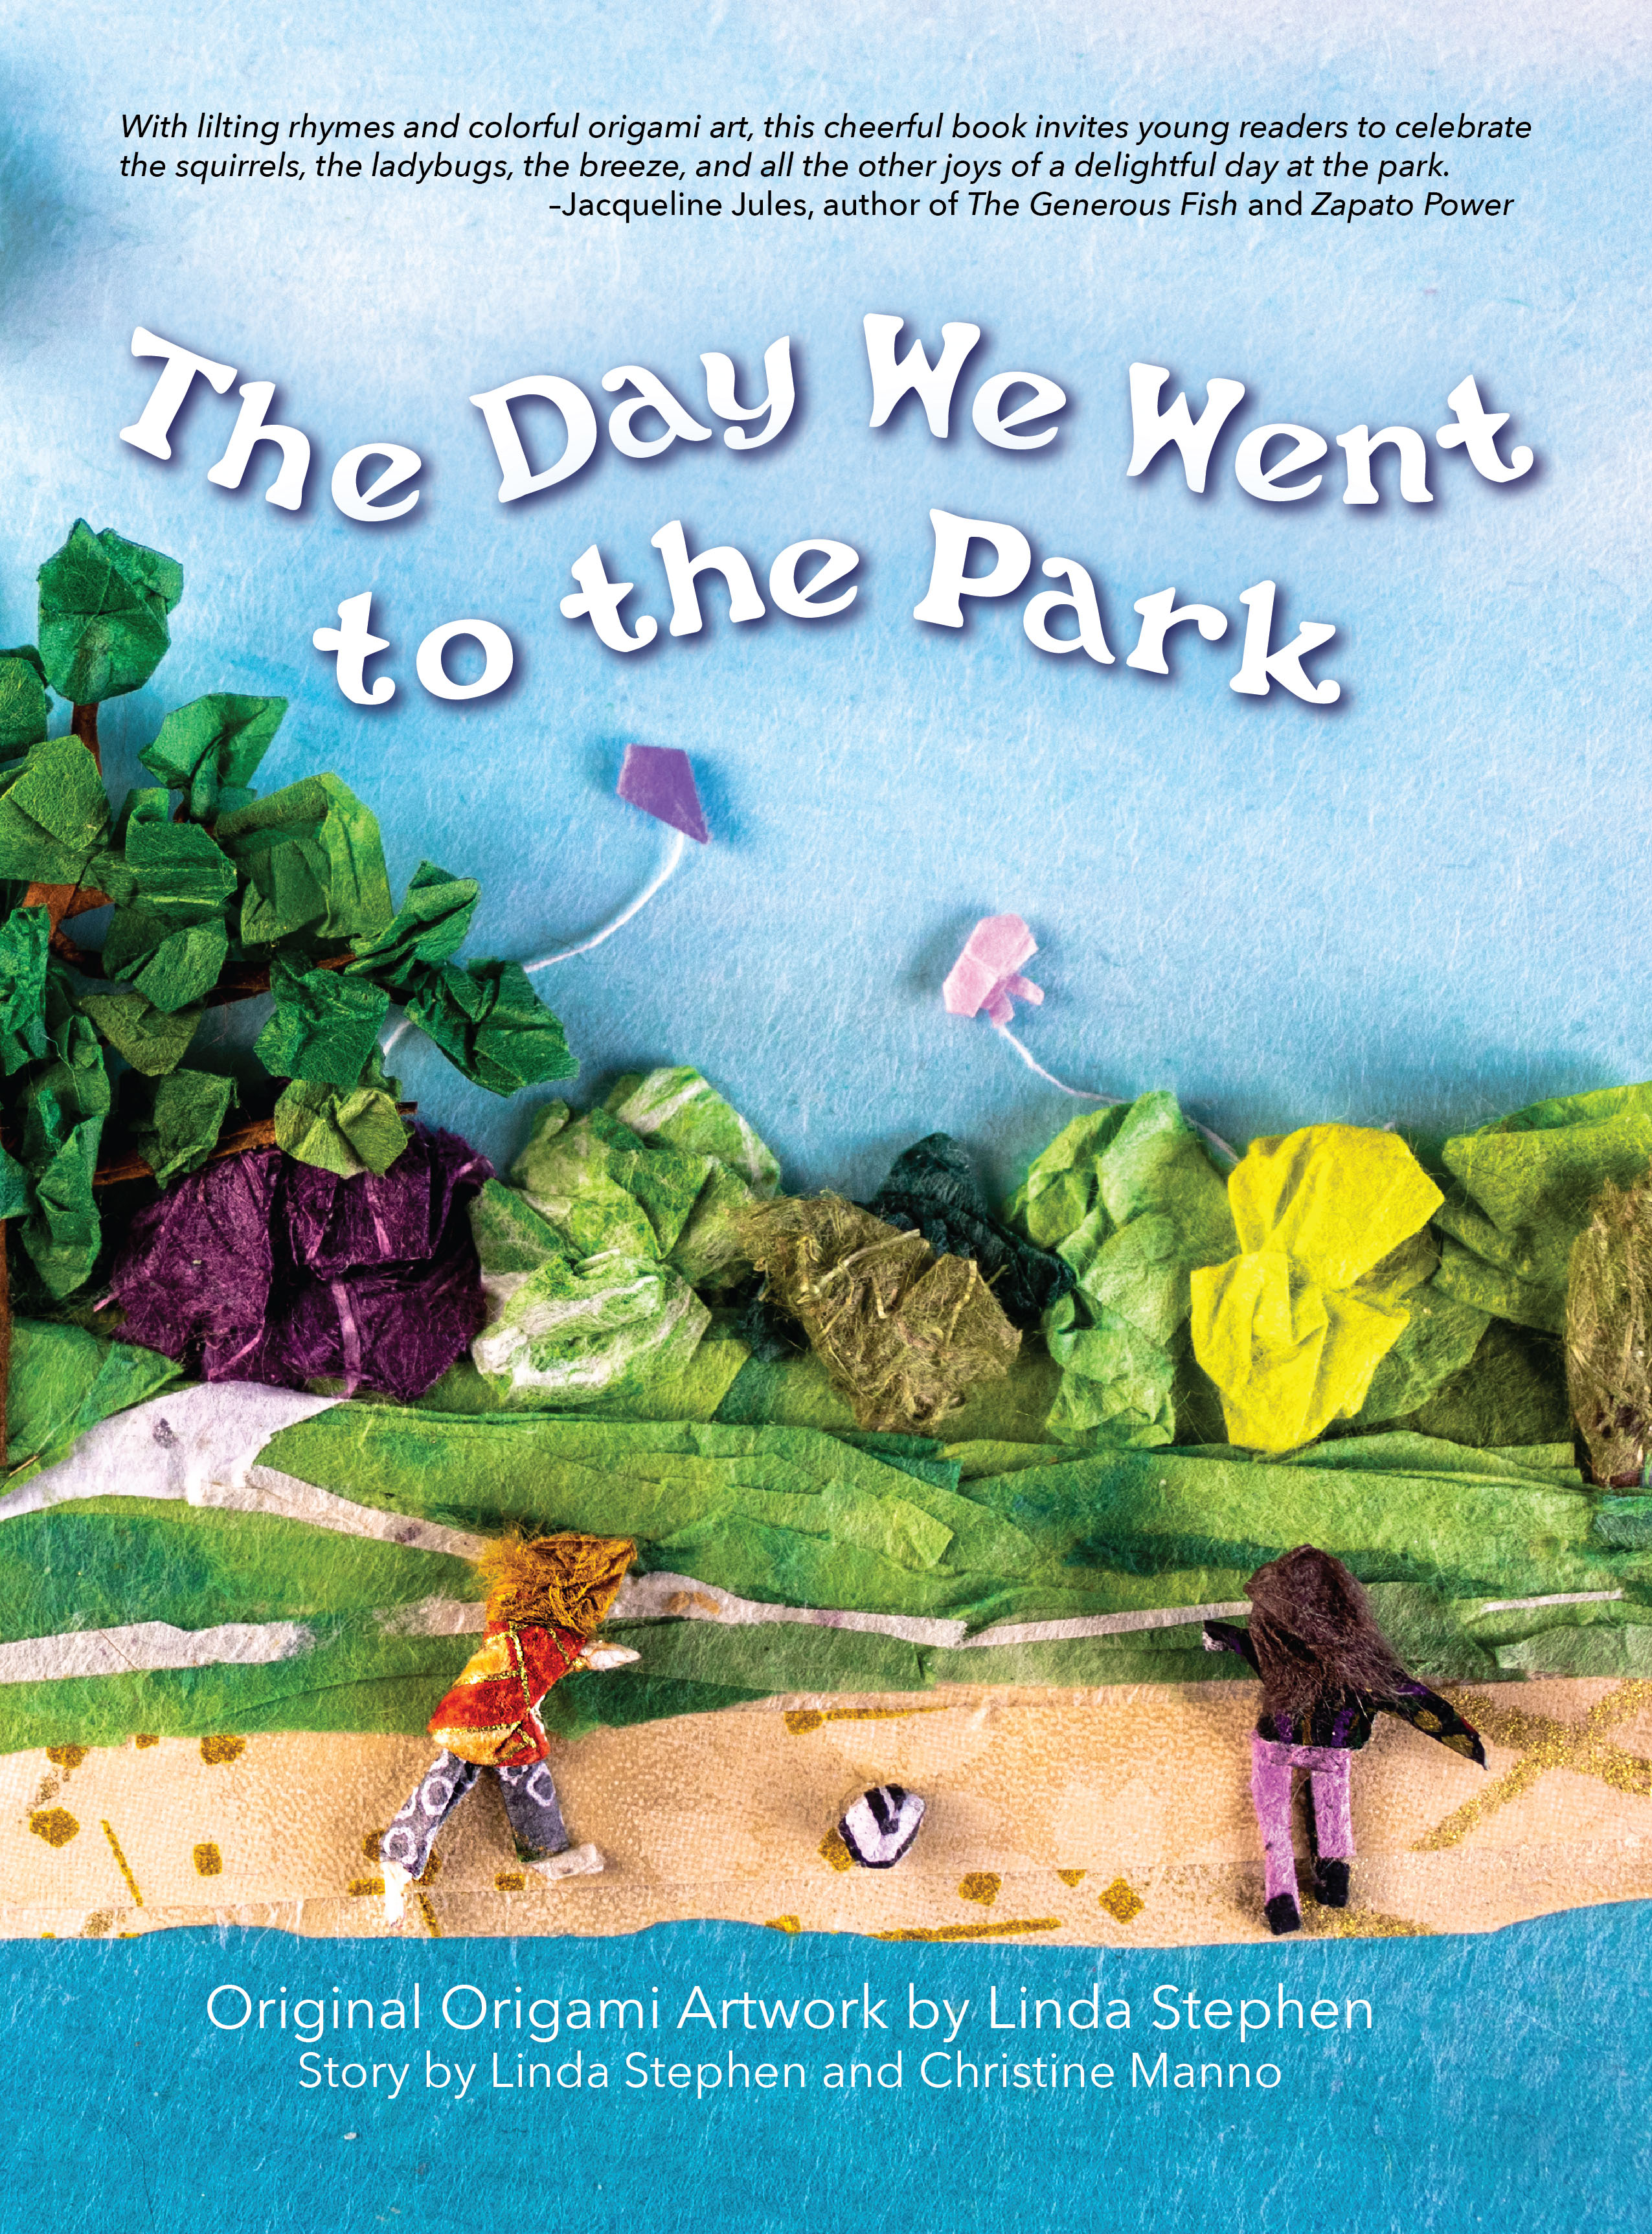 Origami picture book "The Day We Went to the Park" by Linda Stephen and Christine Manno (Handersen Publishing, February 2020).